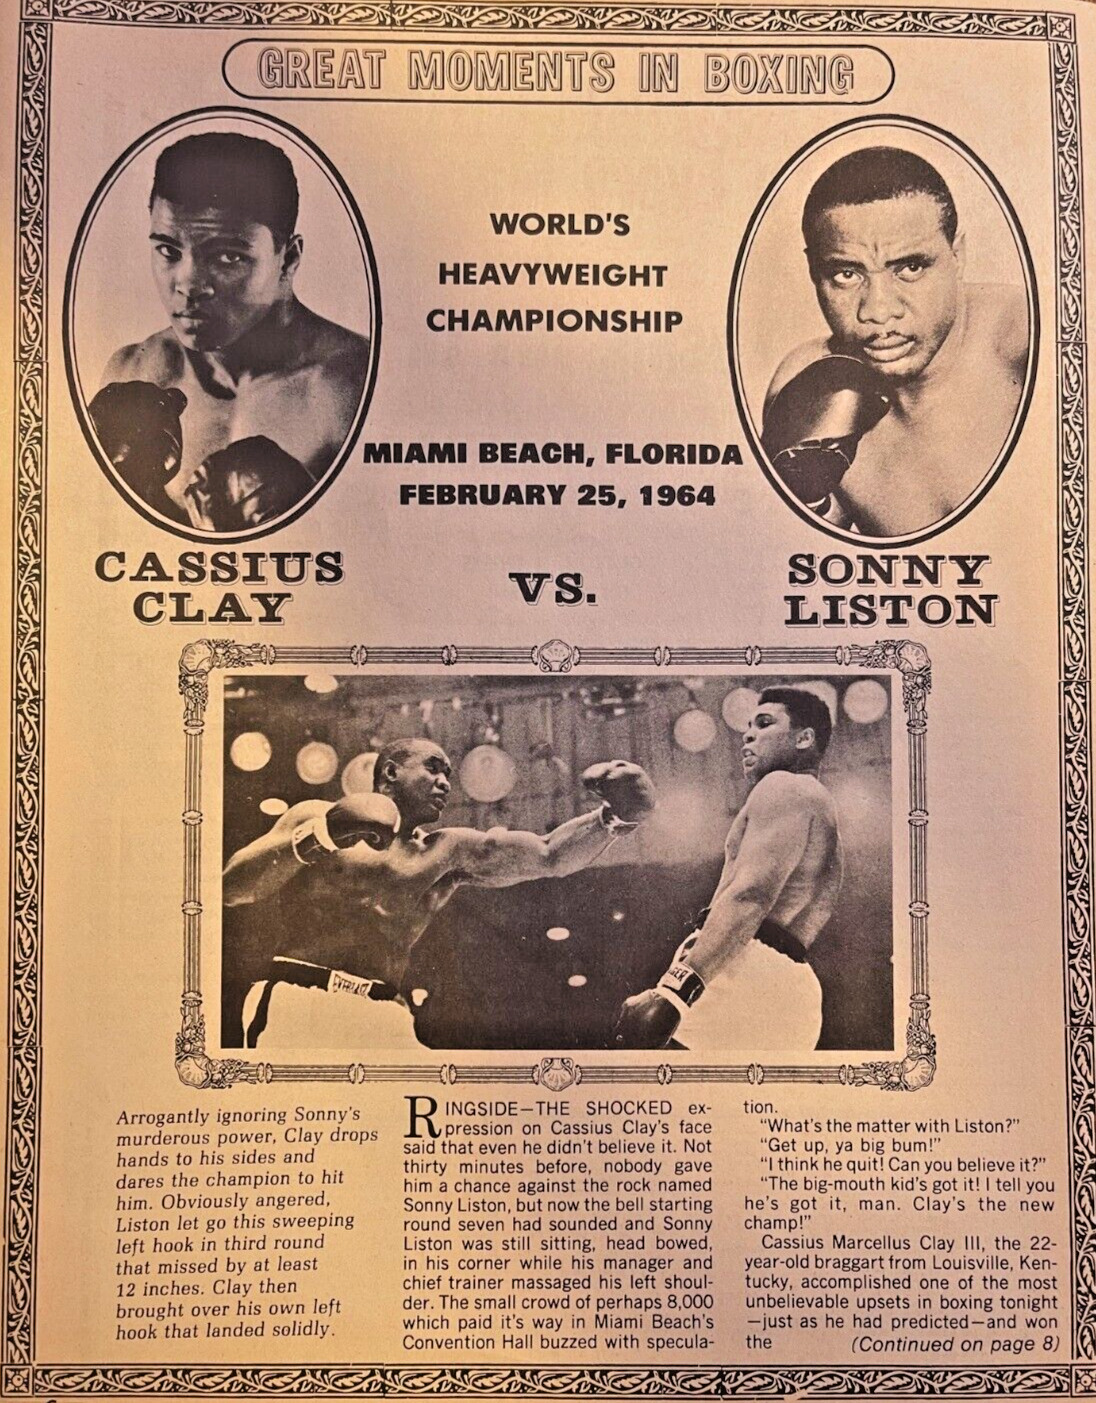 1970 Boxing Match Cassius Clay vs Sonny Liston February 25 1964